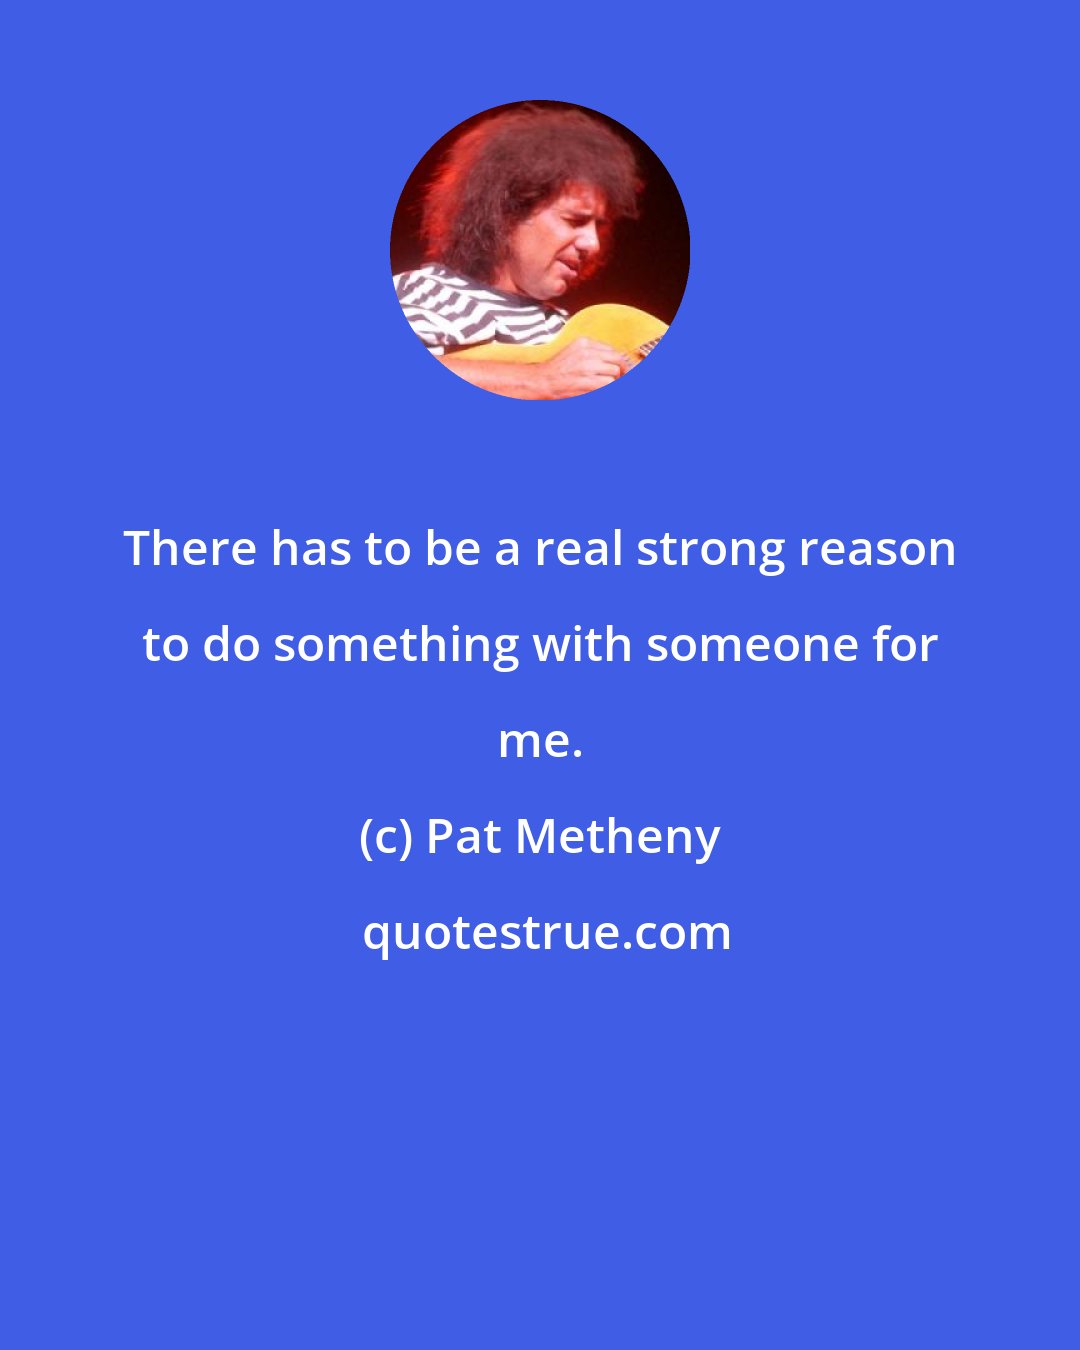 Pat Metheny: There has to be a real strong reason to do something with someone for me.